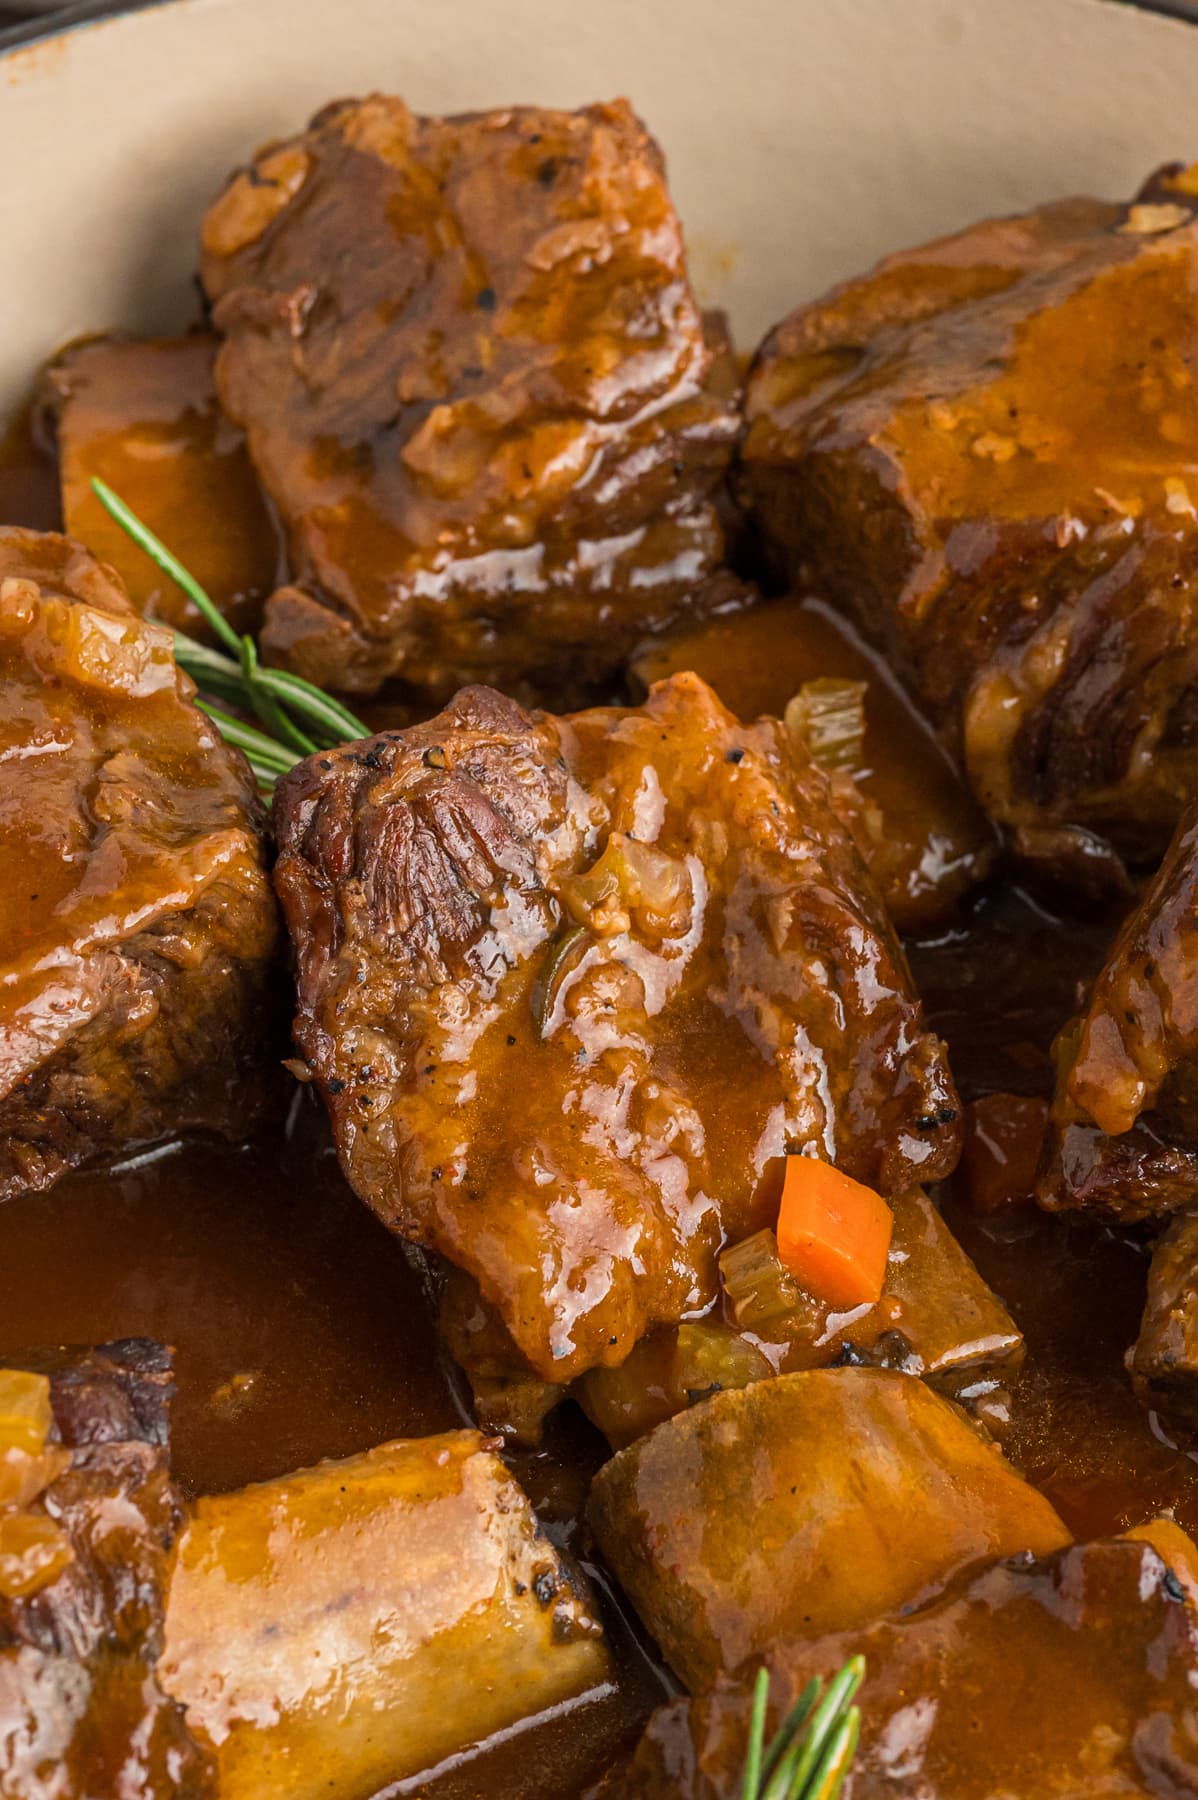 Braised short ribs in a pot